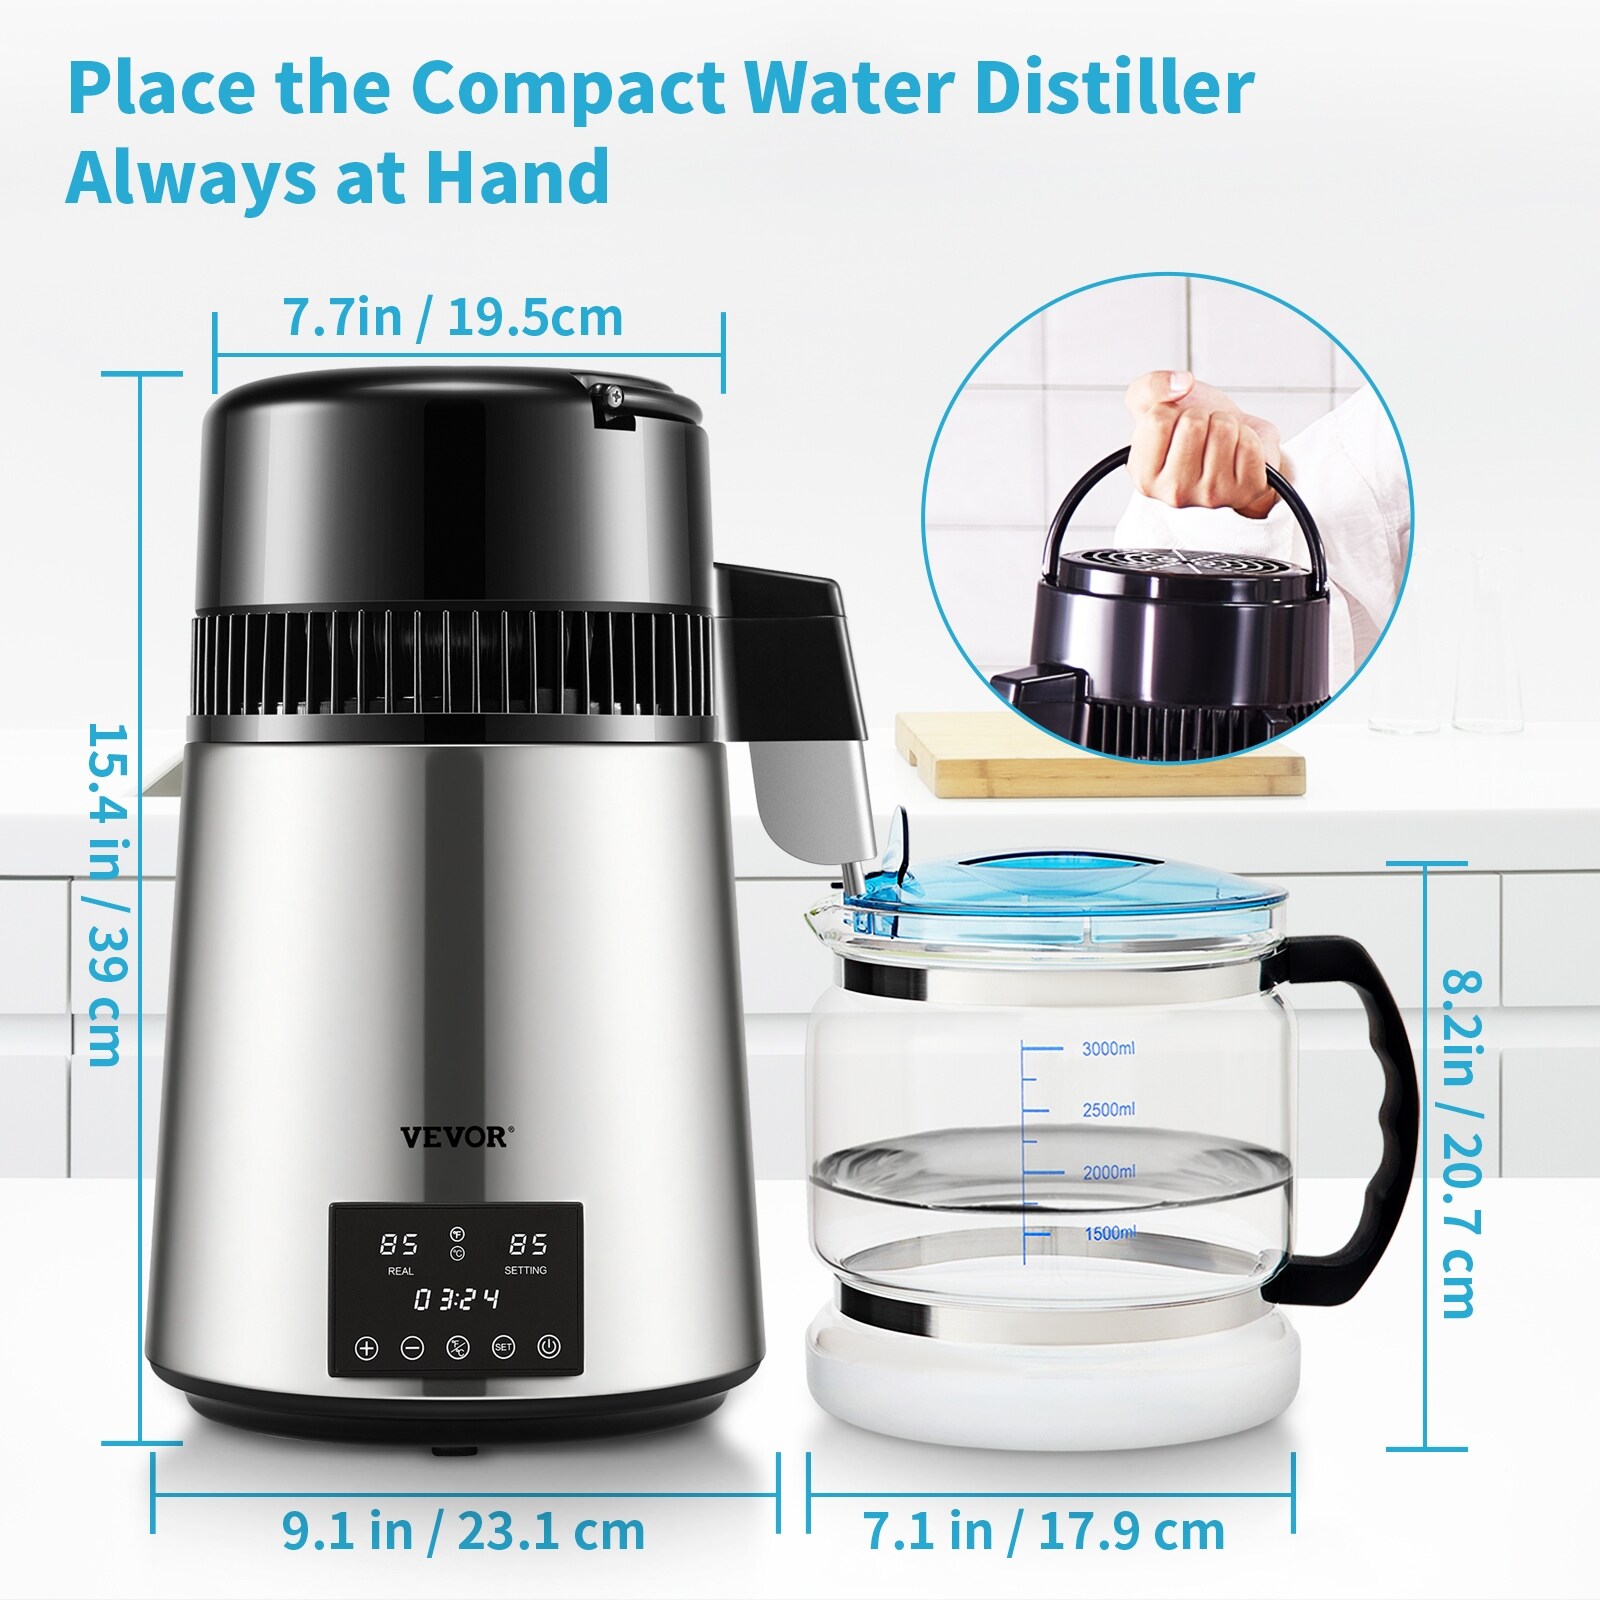 https://ak1.ostkcdn.com/images/products/is/images/direct/7a0dc7b280a521ac5e0fb2ebe855e6248eb05920/VEVOR-1.1Gal-Water-Distiller-0.3Gal-H-Distilled-Water-Maker-Machine-750W-0-99H-Timing-Dual-Temp-Display-Stainless-Steel.jpg